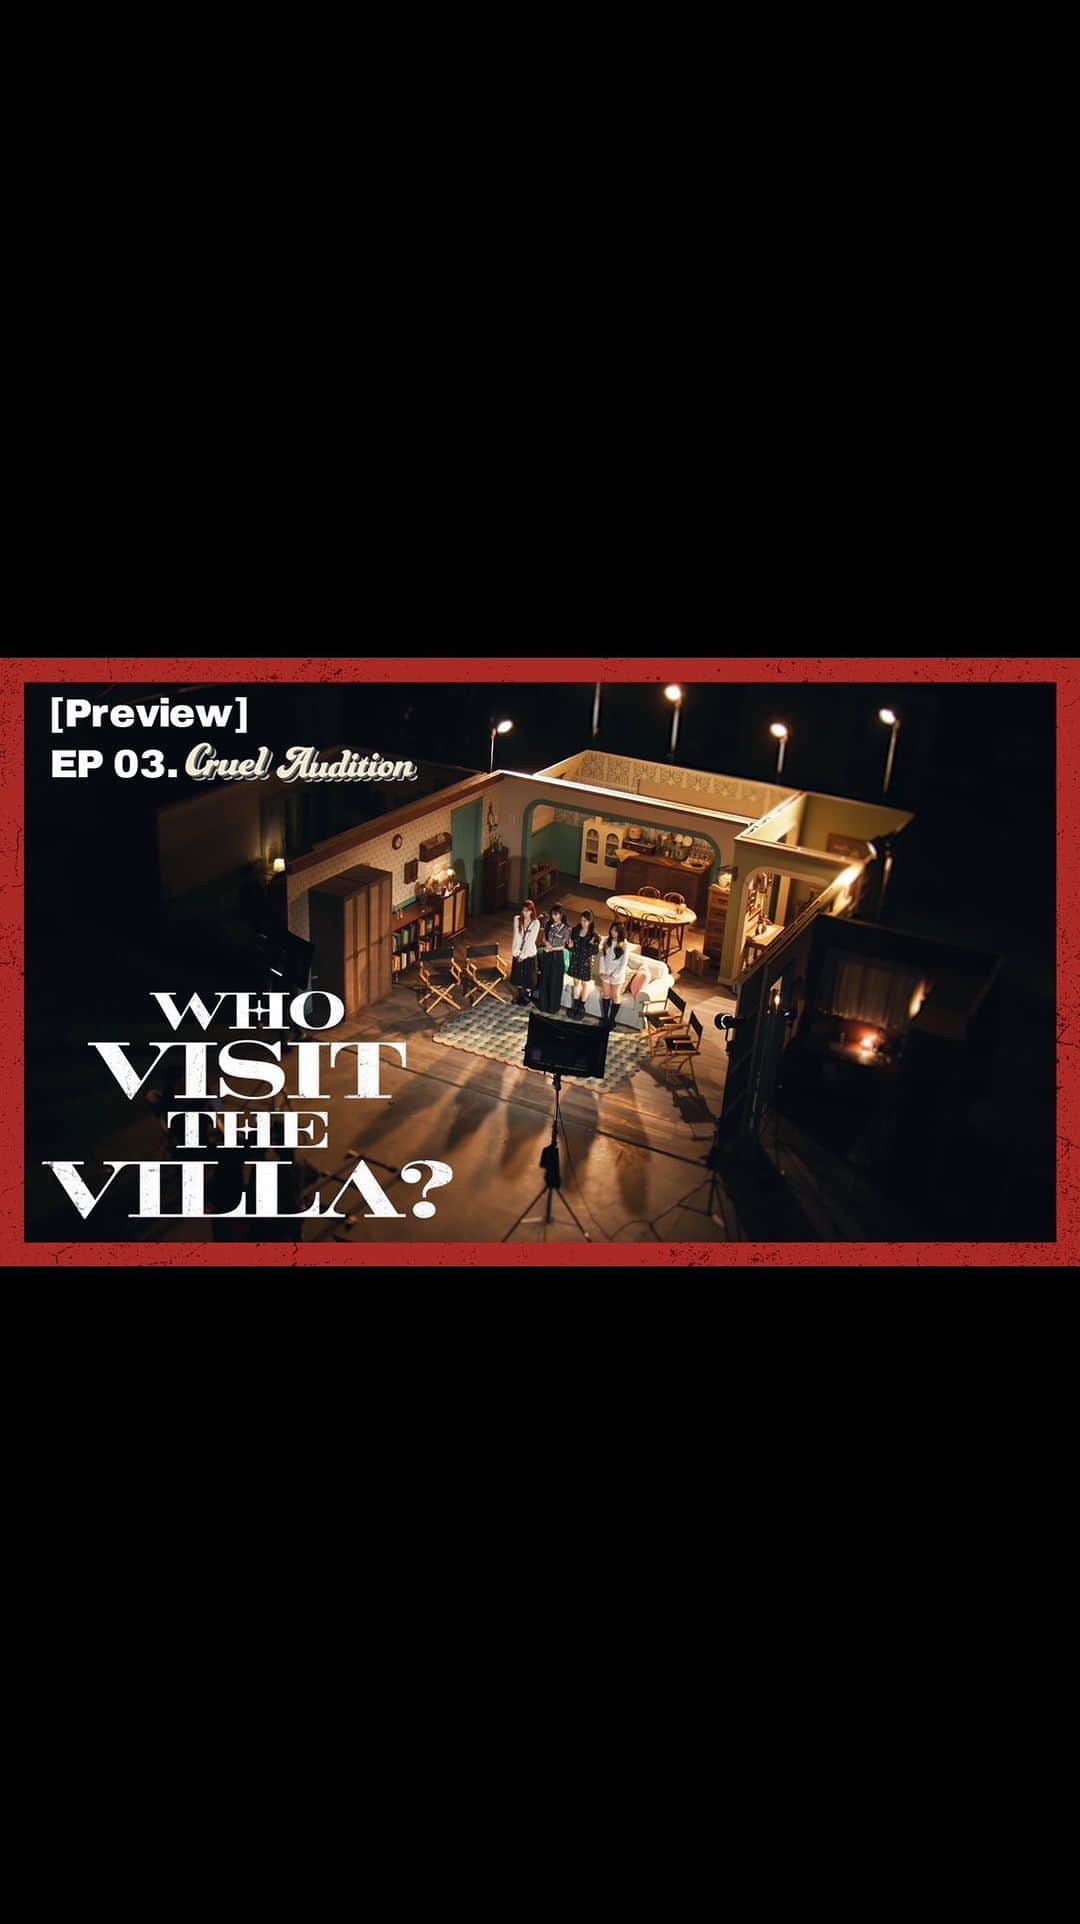 SMエンターテインメントのインスタグラム：「[EP 03. Preview] Who visit the VILLA? : Cruel Audition | aespa 에스파 MYSTERY DRAMA ORIGINAL SERIES 📺   https://youtu.be/__wKJD7V10Y   ‘Who visit the VILLA?’ Release Schedule 📍 aespa YouTube Channel EP 01 ➫ https://youtu.be/p3JoA69072o EP 02 ➫ https://youtu.be/WB9Y1XlqwYQ EP 03. Cruel Audition: Nov 25 10PM(KST)   #aespa #æspa #에스파 @aespa_official  #Drama #aespaDrama #WhovisittheVILLA #aespaORIGINALSERIES #HideandSeek #Whoareyou #CruelAudition」